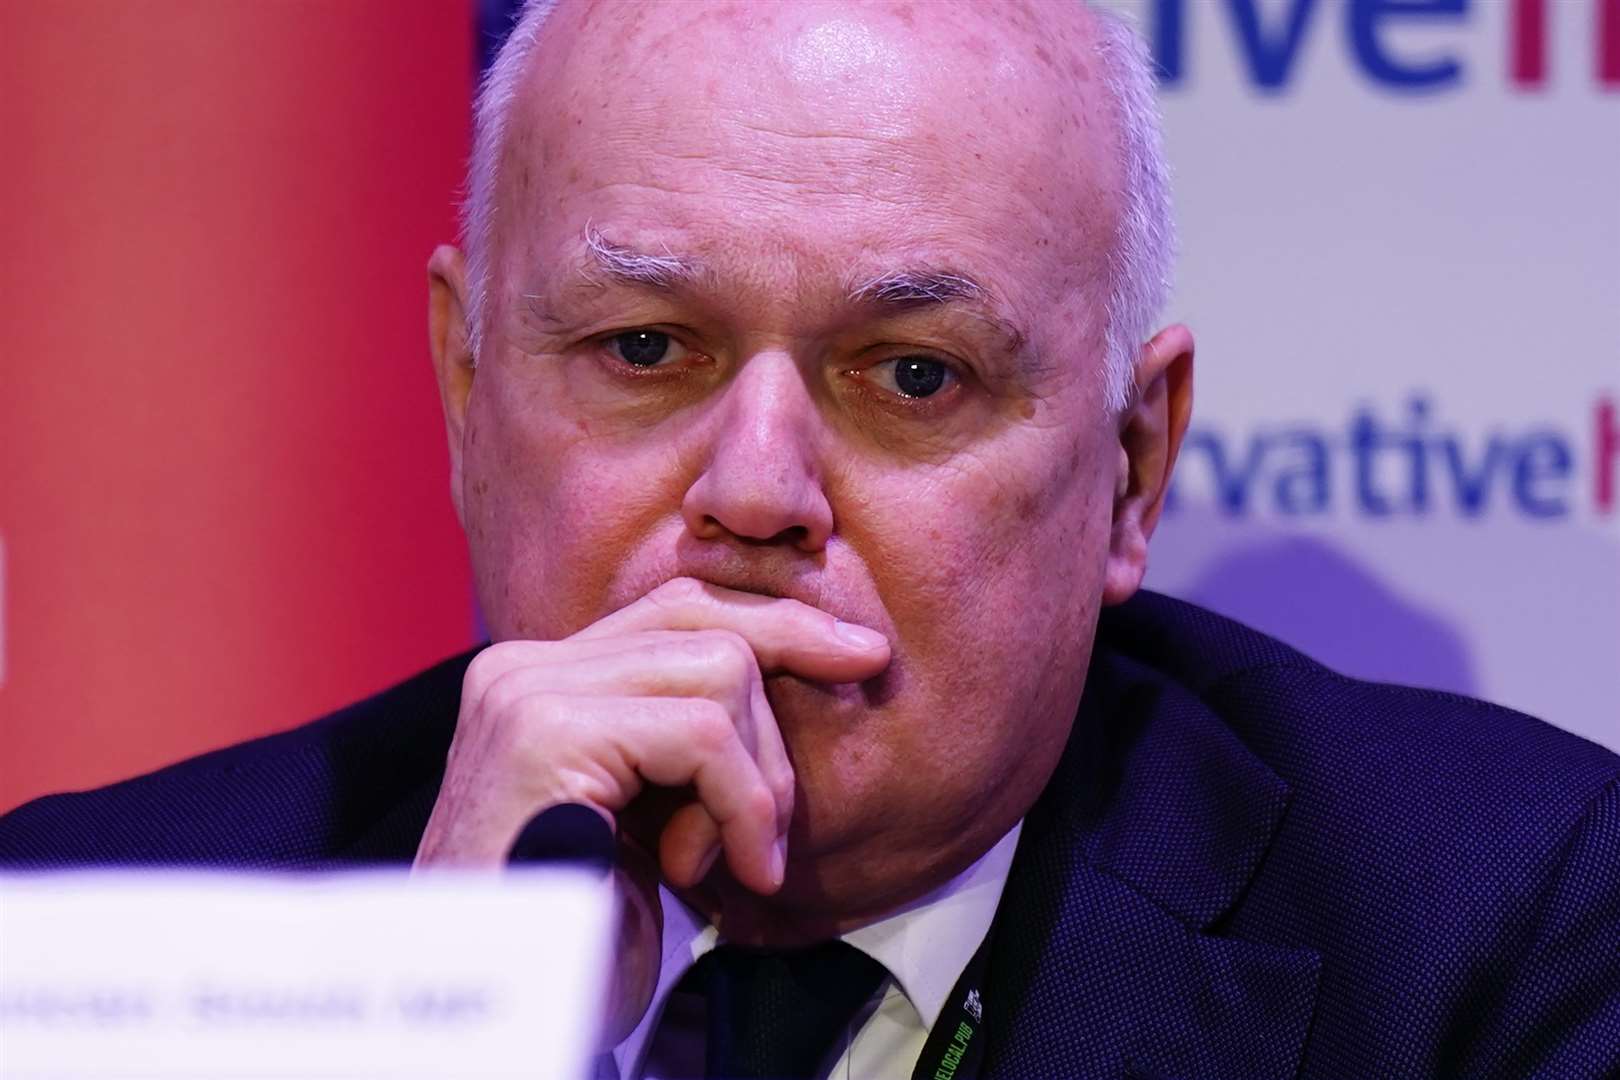 Former Tory leader Sir Iain Duncan Smith has warned of a ‘deepening threat’ being posed by China under President Xi Jinping (Aaron Chown/PA)